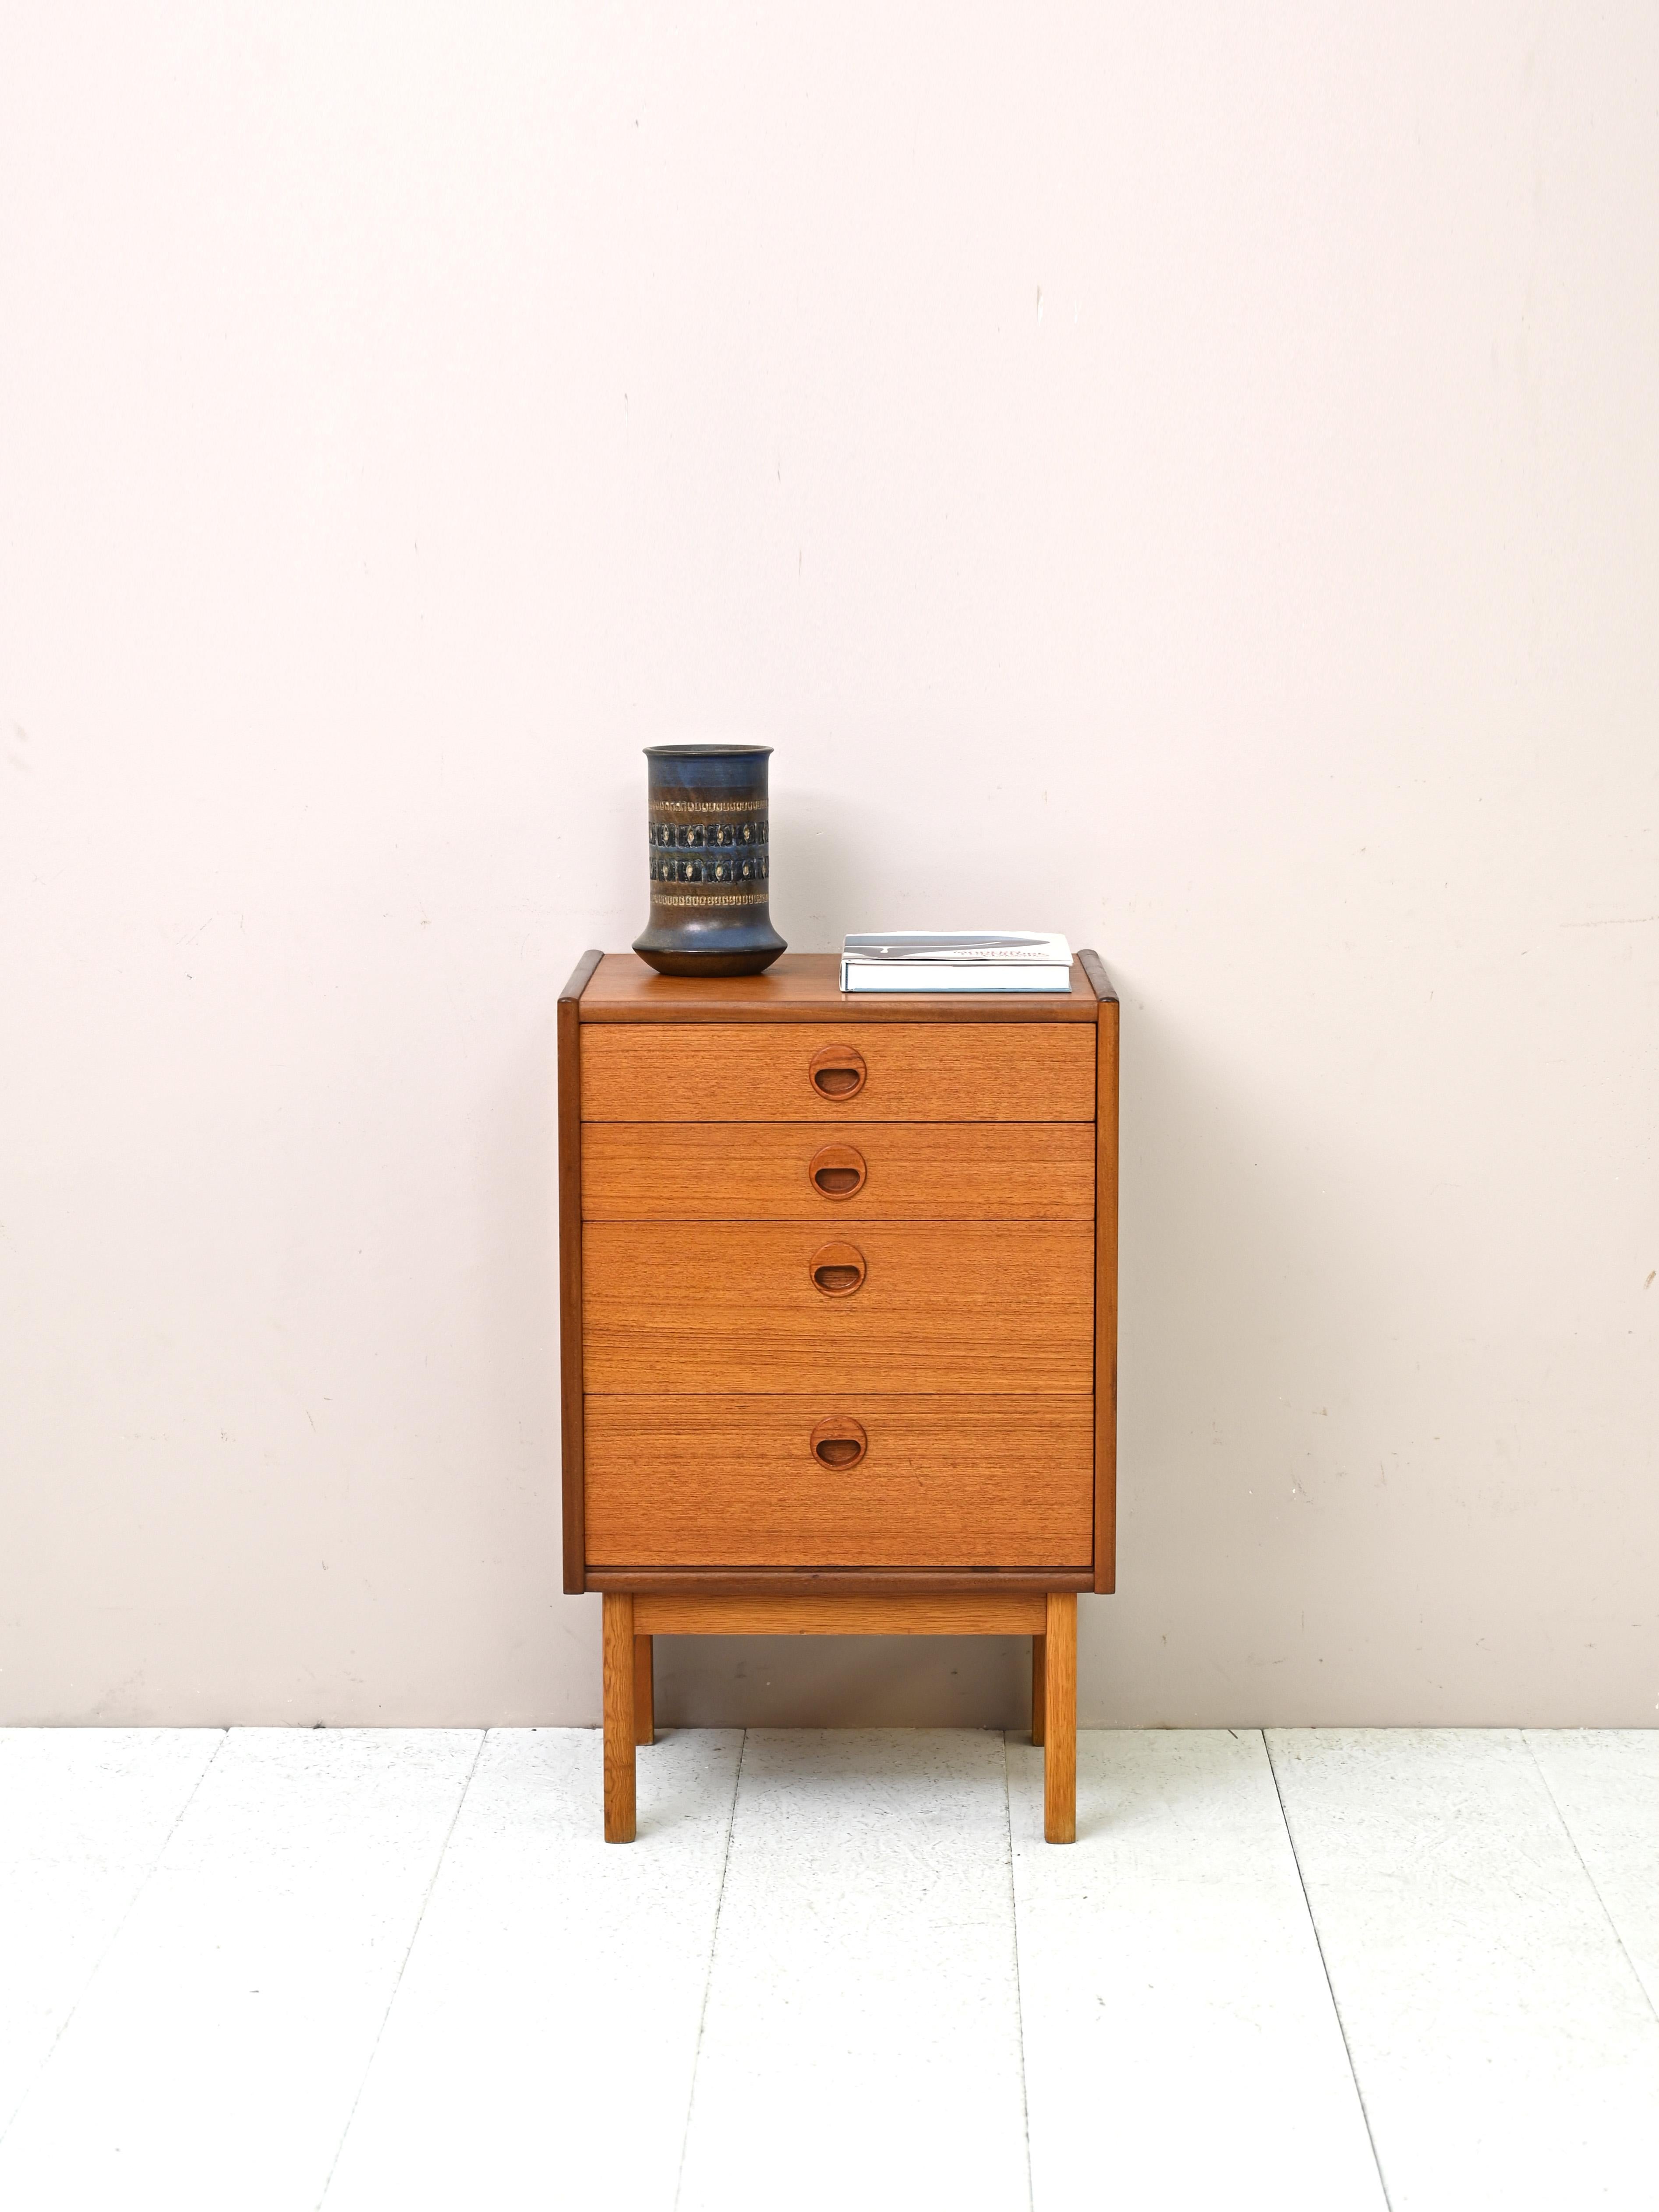 Modernist chest of drawers made in Scandinavia in the 1960s.
Simple and compact, this Nordic design piece features four drawers with the handle carved from wood.
Ideal as a bedside table or storage unit for the entryway or bathroom.

Good condition.